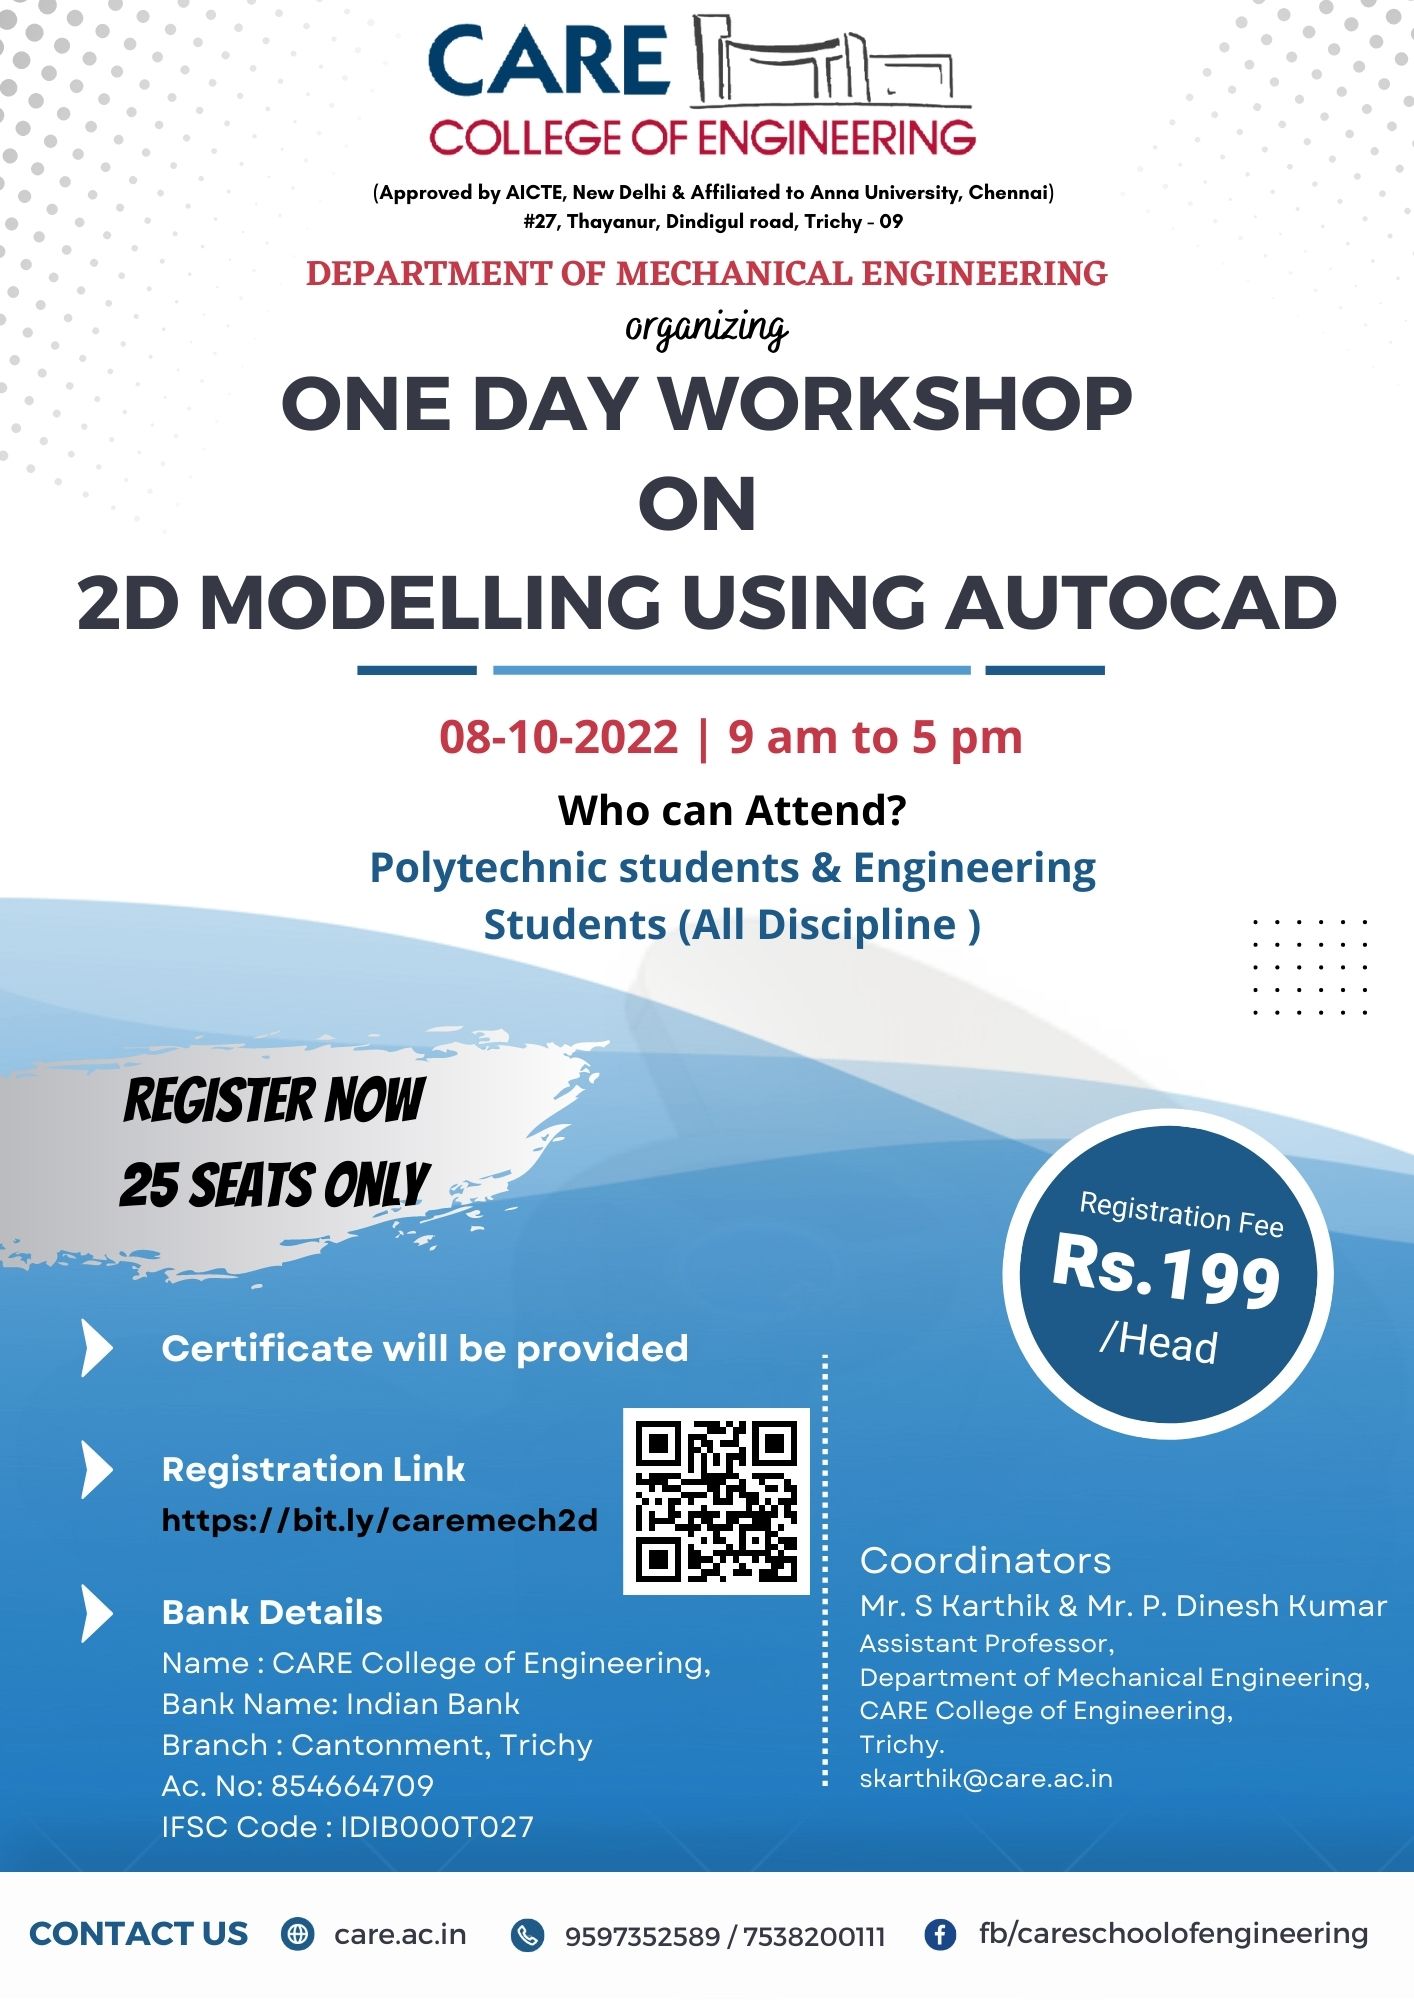 One Day Workshop on 2D Modelling using AutoCAD 2022